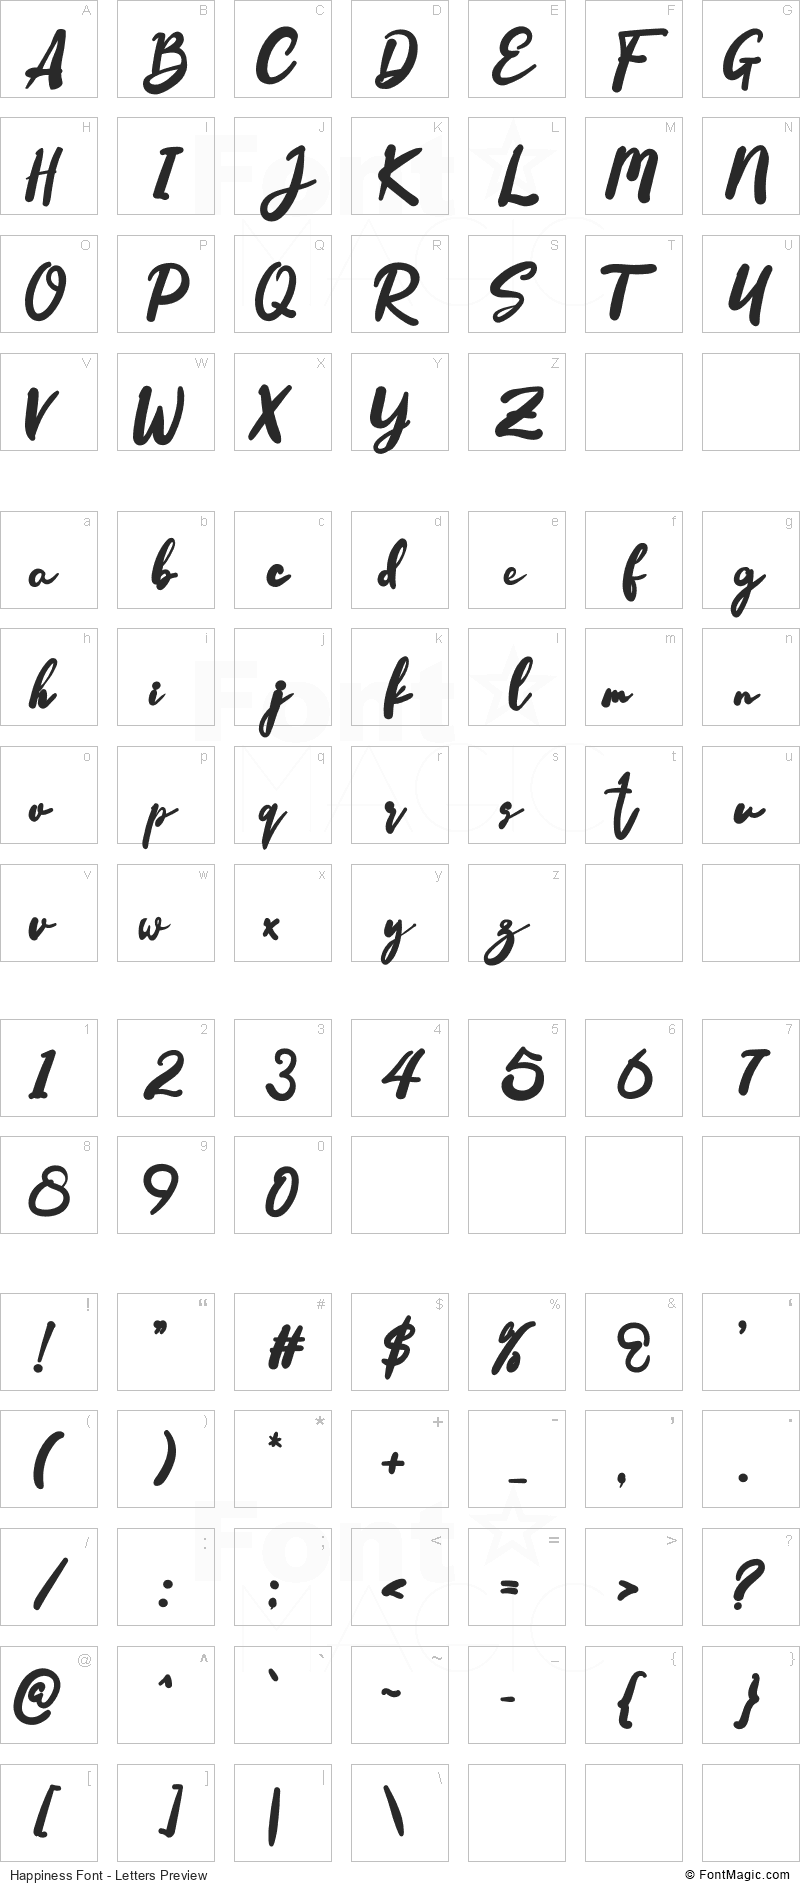 Happiness Font - All Latters Preview Chart